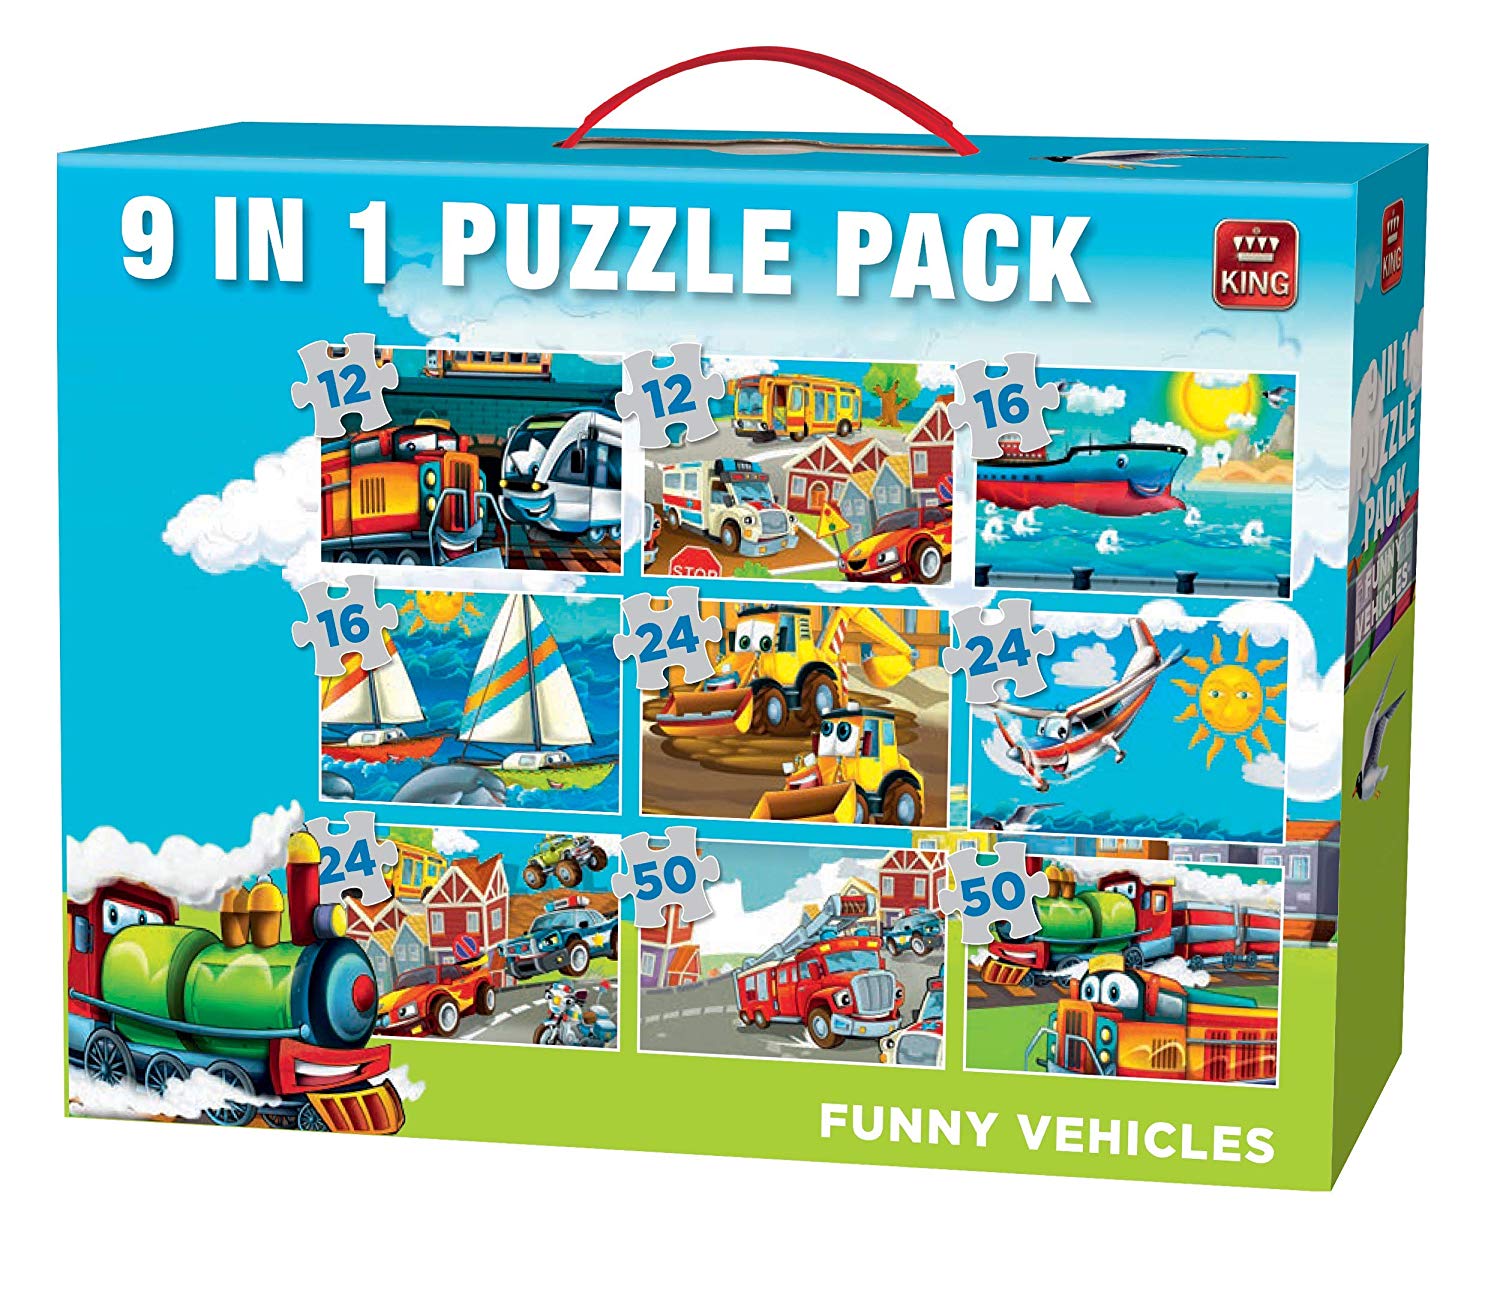 King 5520 Case Funny Vehicles Puzzle 9 in 1 Puzzle Pack – For Girls – Vol. 